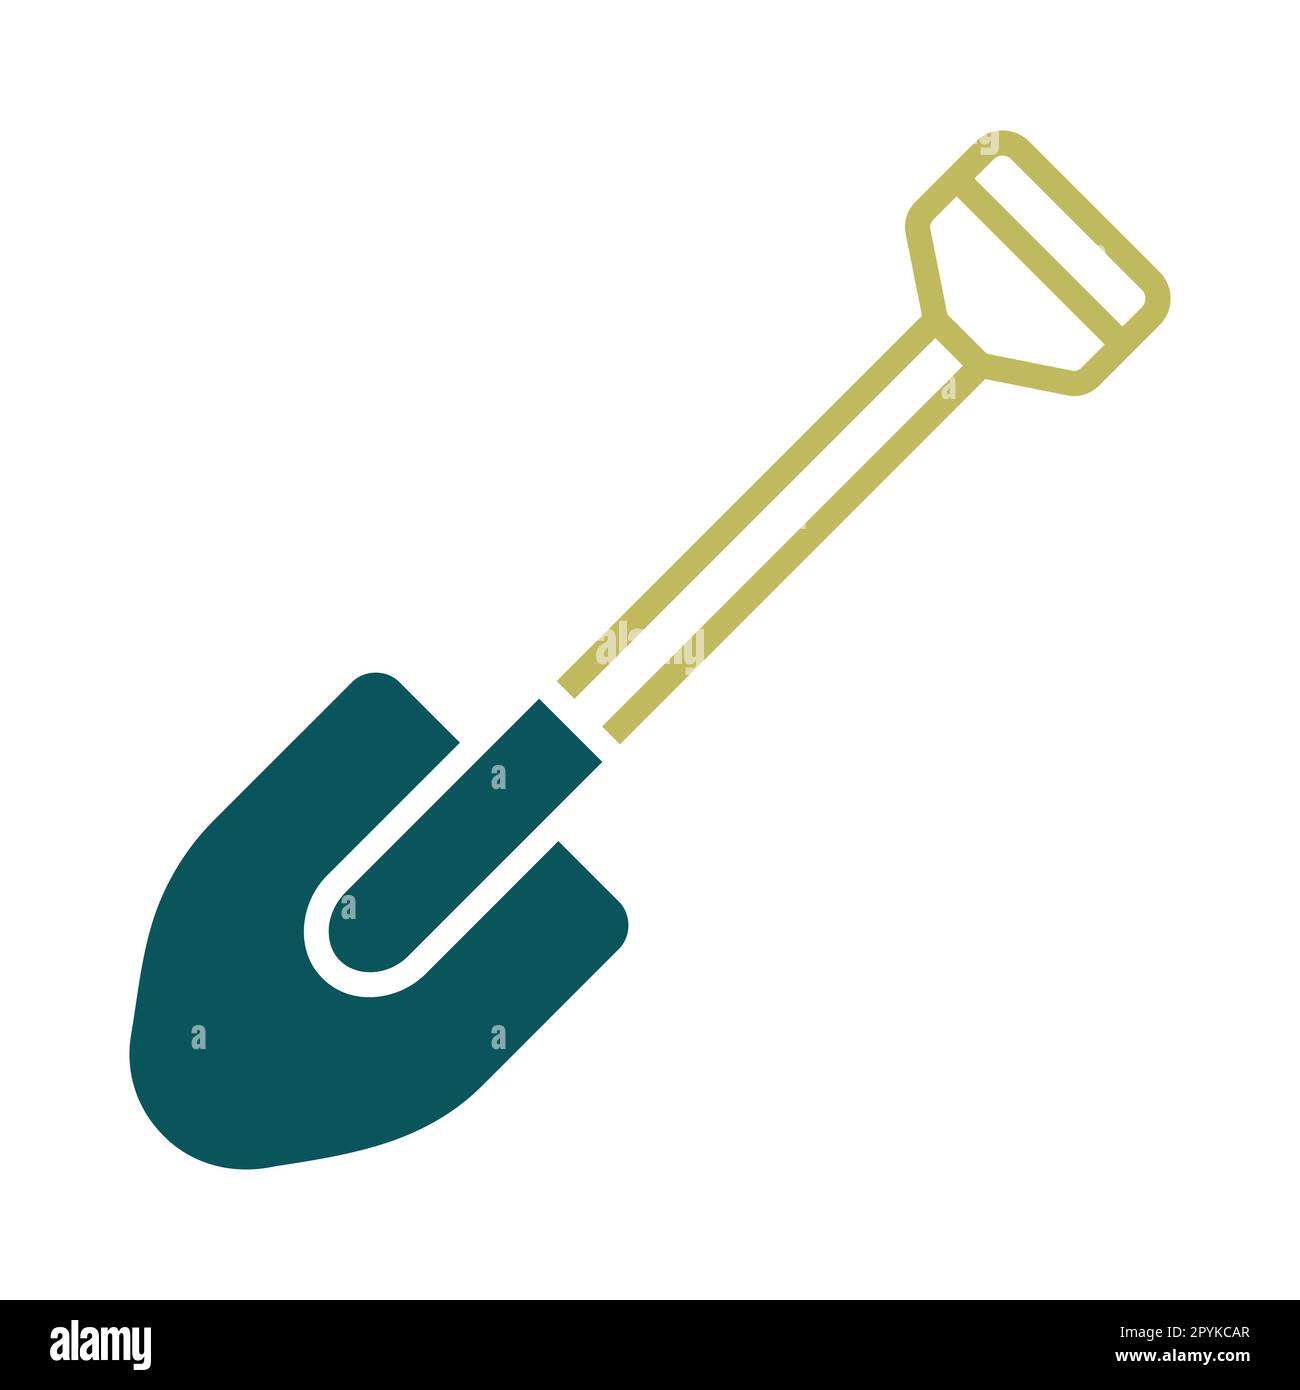 Garden shovel isolated vector icon. Graph symbol for agriculture, garden and plants web site and apps design, logo, app, UI Stock Photo